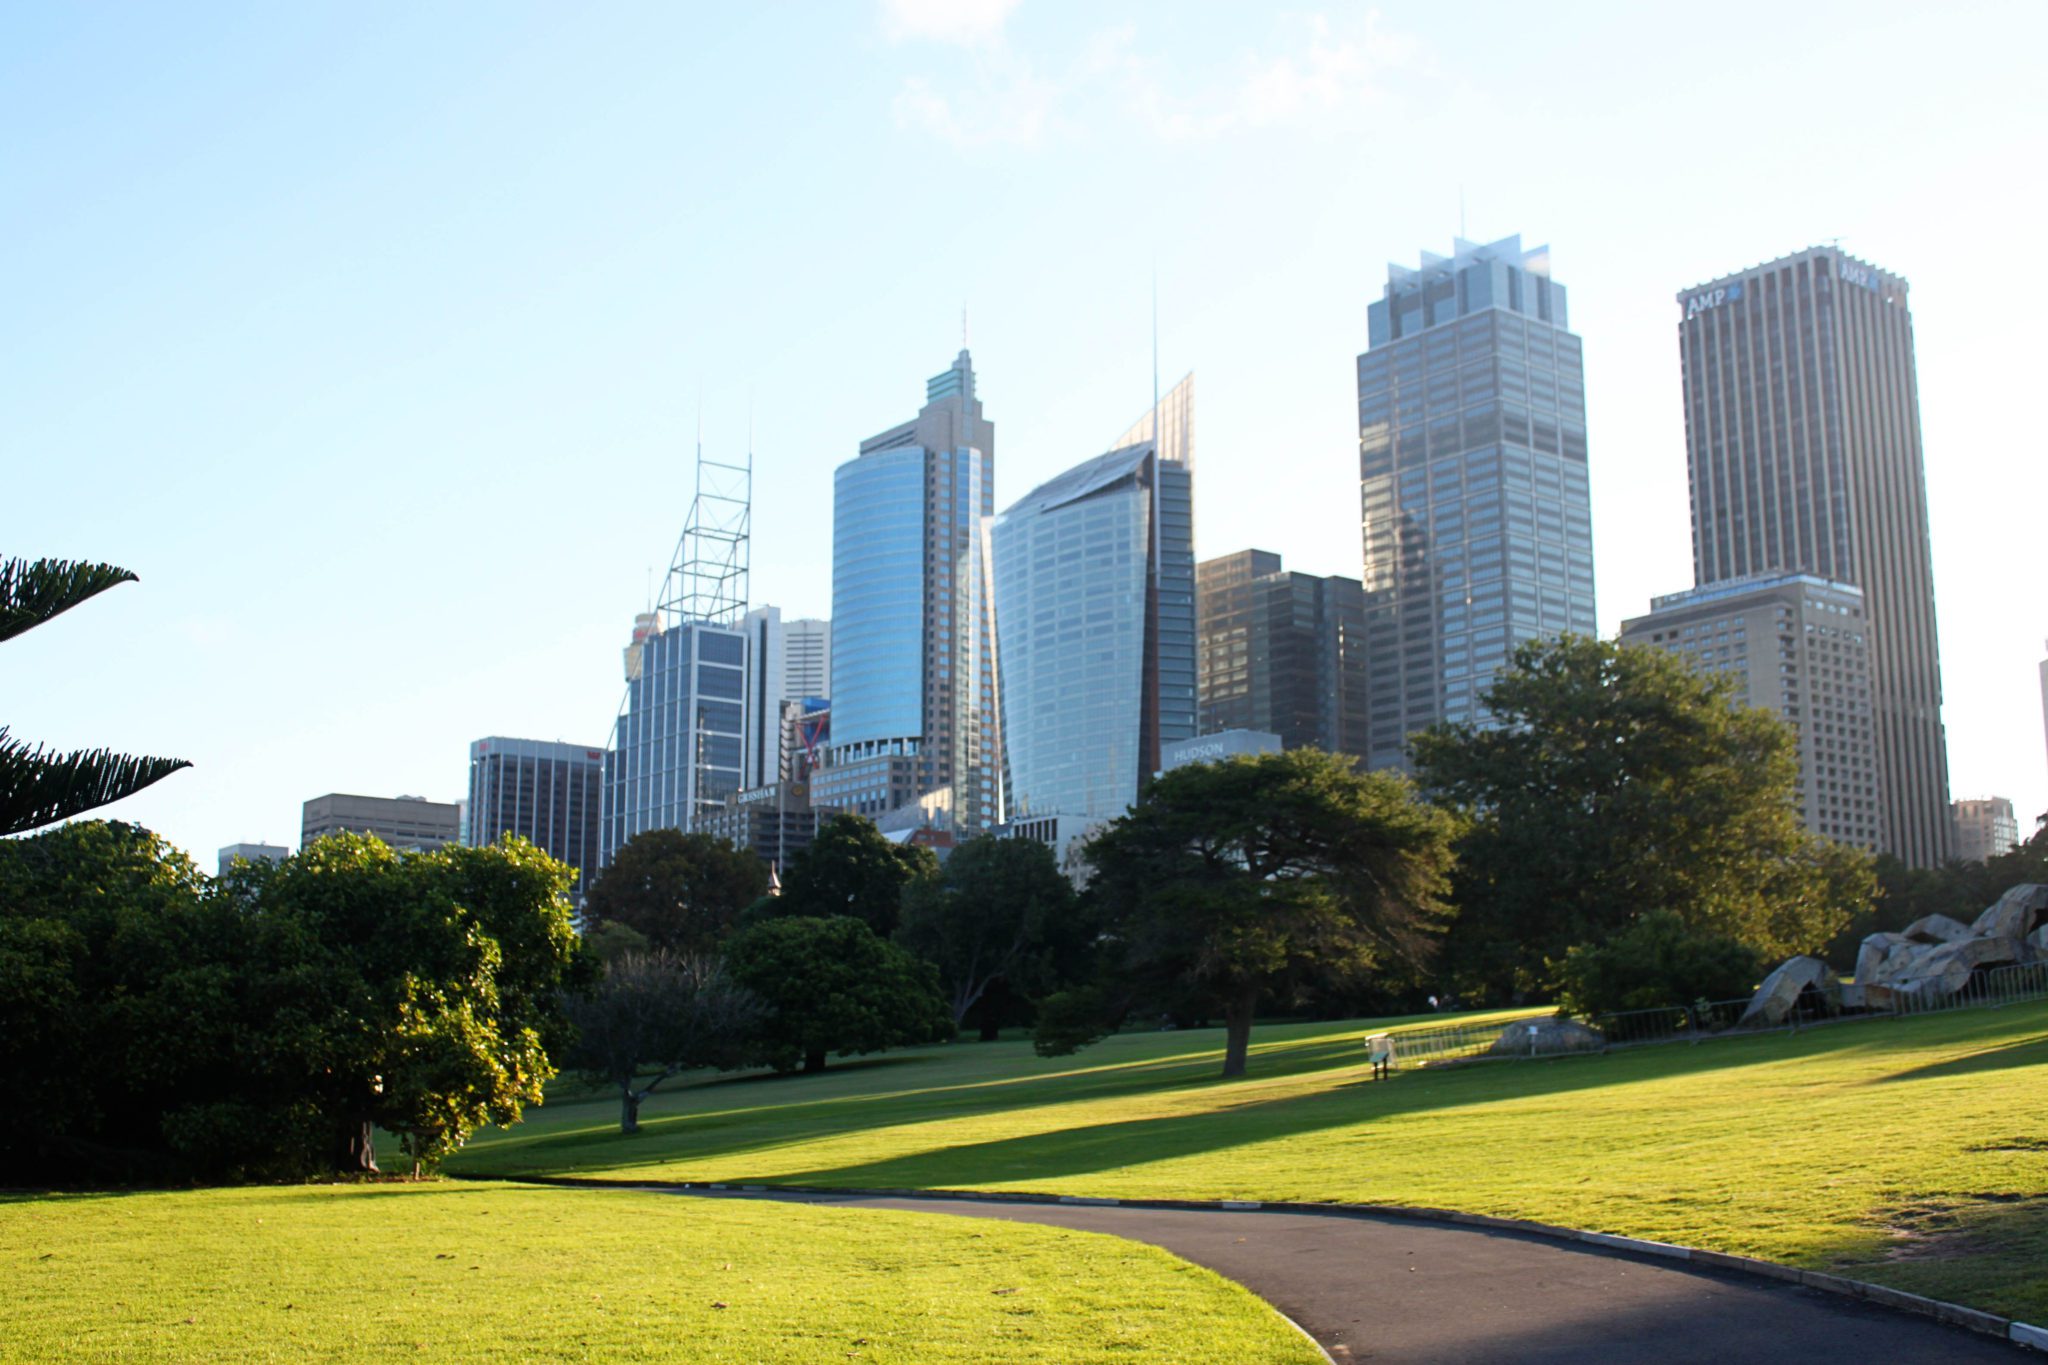 The Royal Botanic Gardens are the oldest public gardens in the southern hemisphere- Top 10 things to do in Sydney #sydney #australia #royalbotanicgardens #simplywander